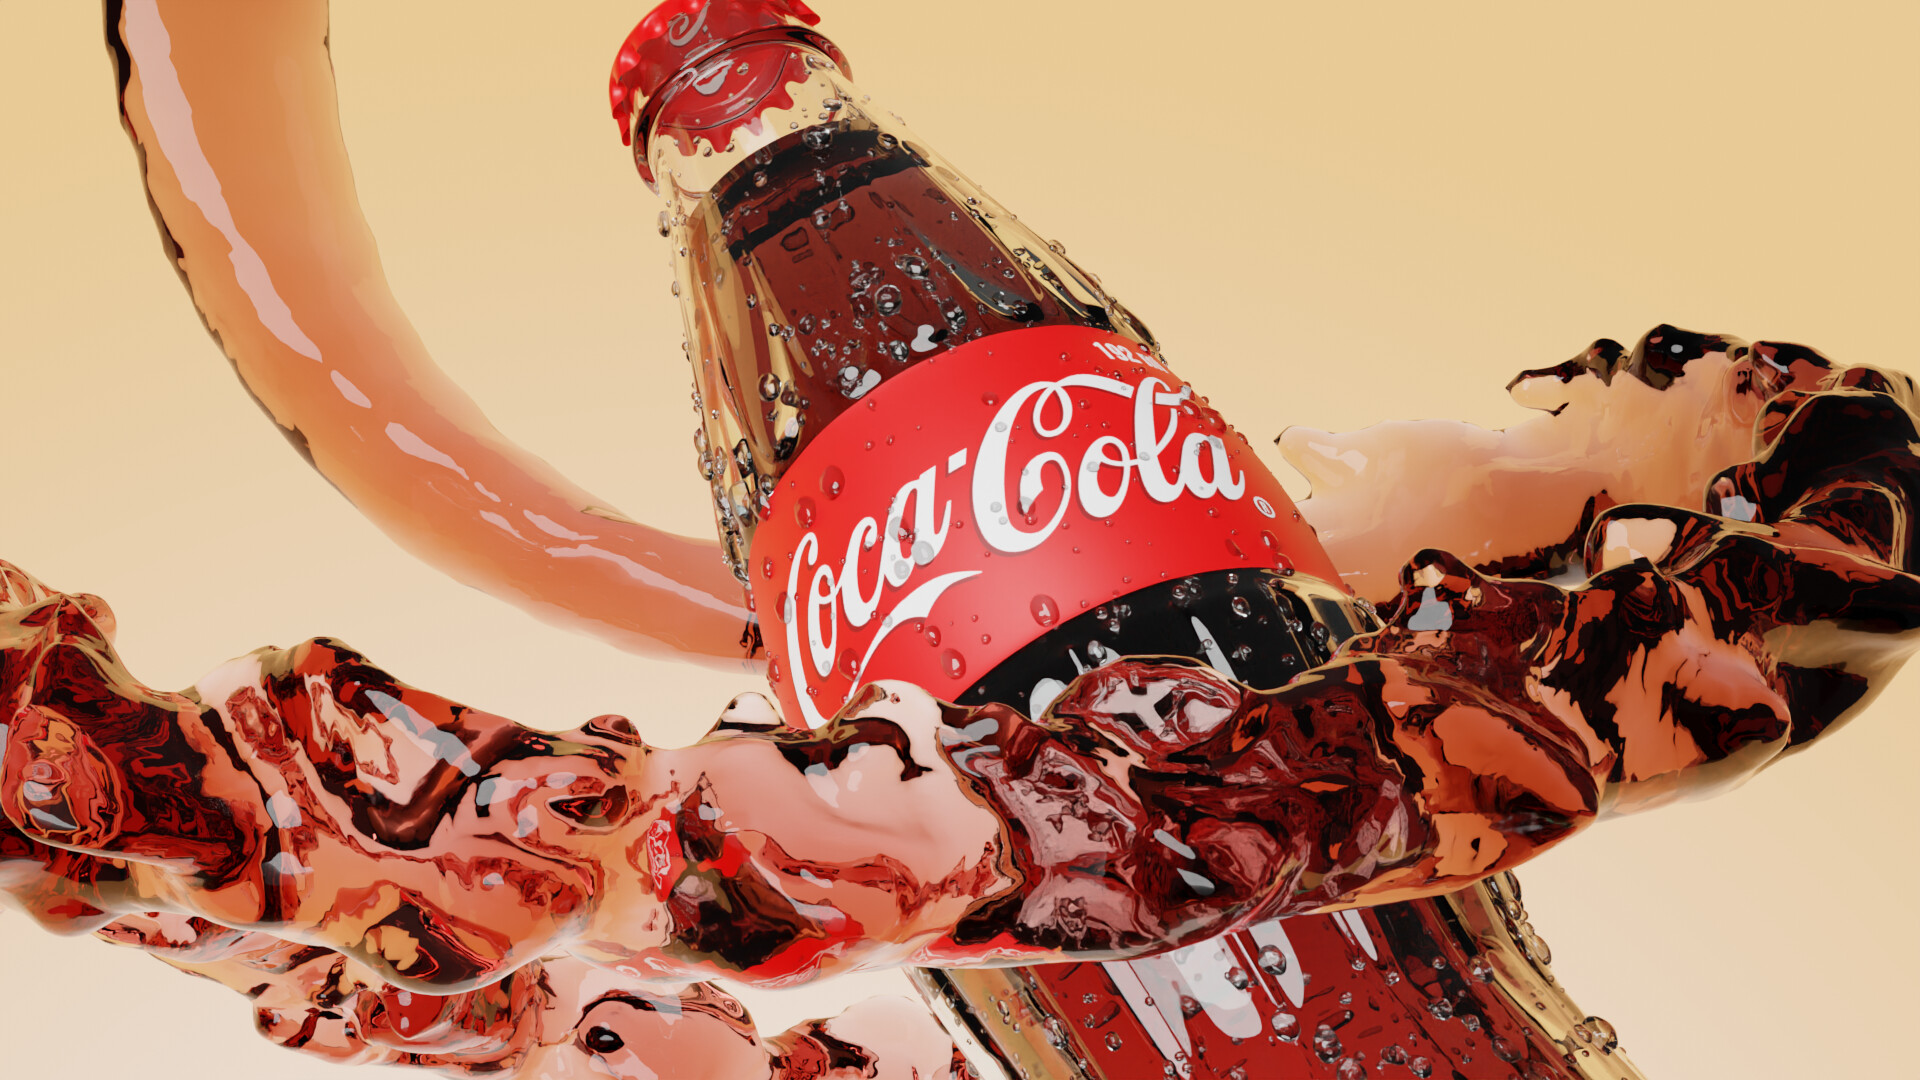 Coca Cola Product renders || personal project | c&c are welcomed - Finished  Projects - Blender Artists Community